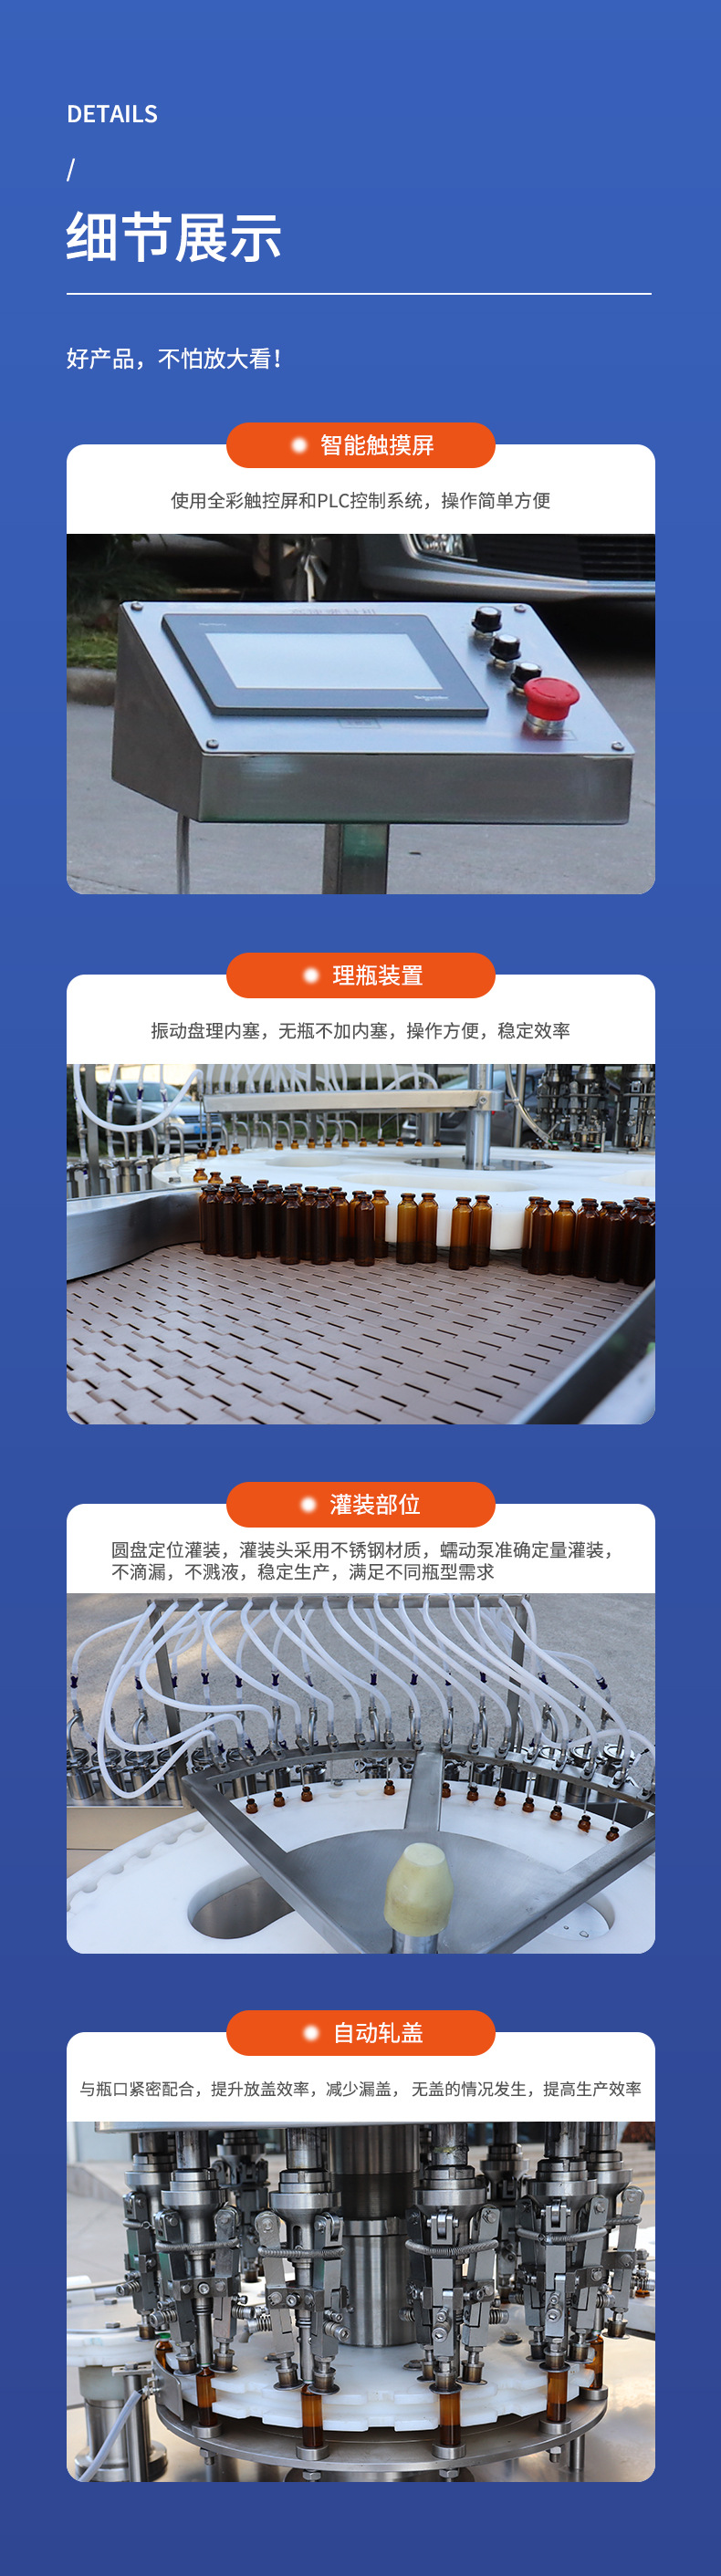 Xilin Bottle Liquid Oral Liquid Filling Machine 5ml Liquid Filling, Stopping and Capping Automatic Capping and Capping Production Line